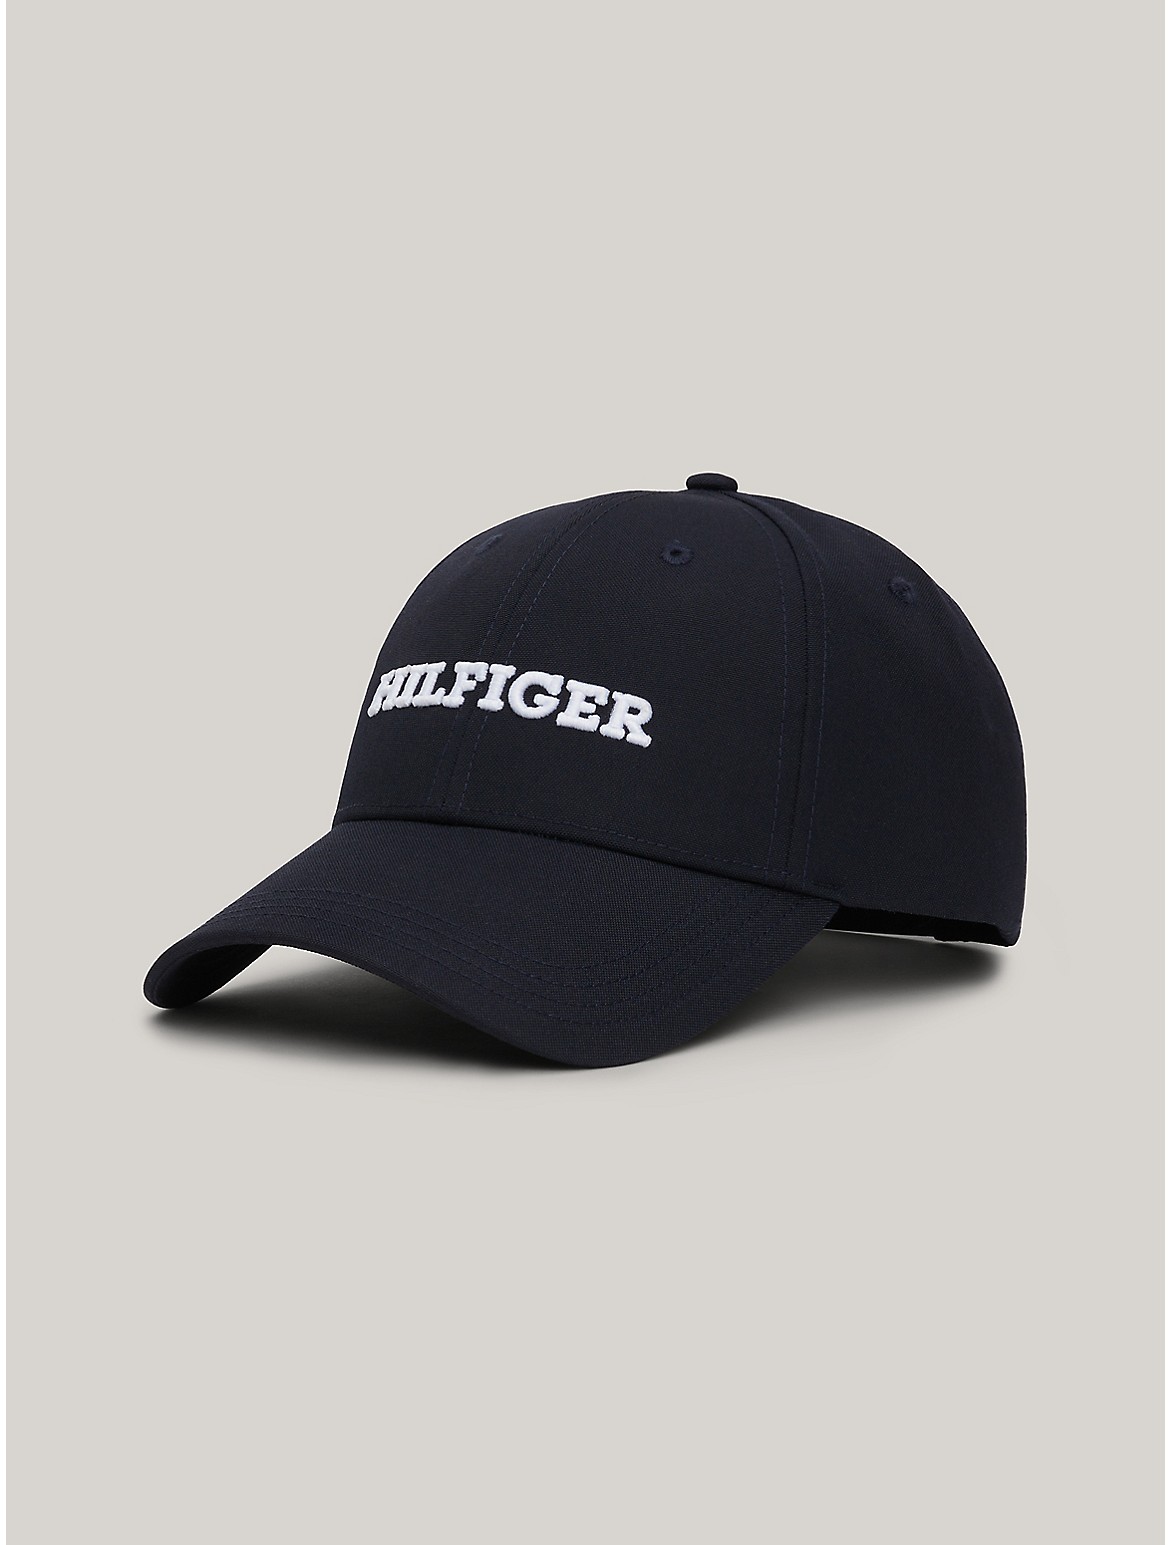 Tommy Hilfiger Men's Embroidered Monotype Snap Back Cap